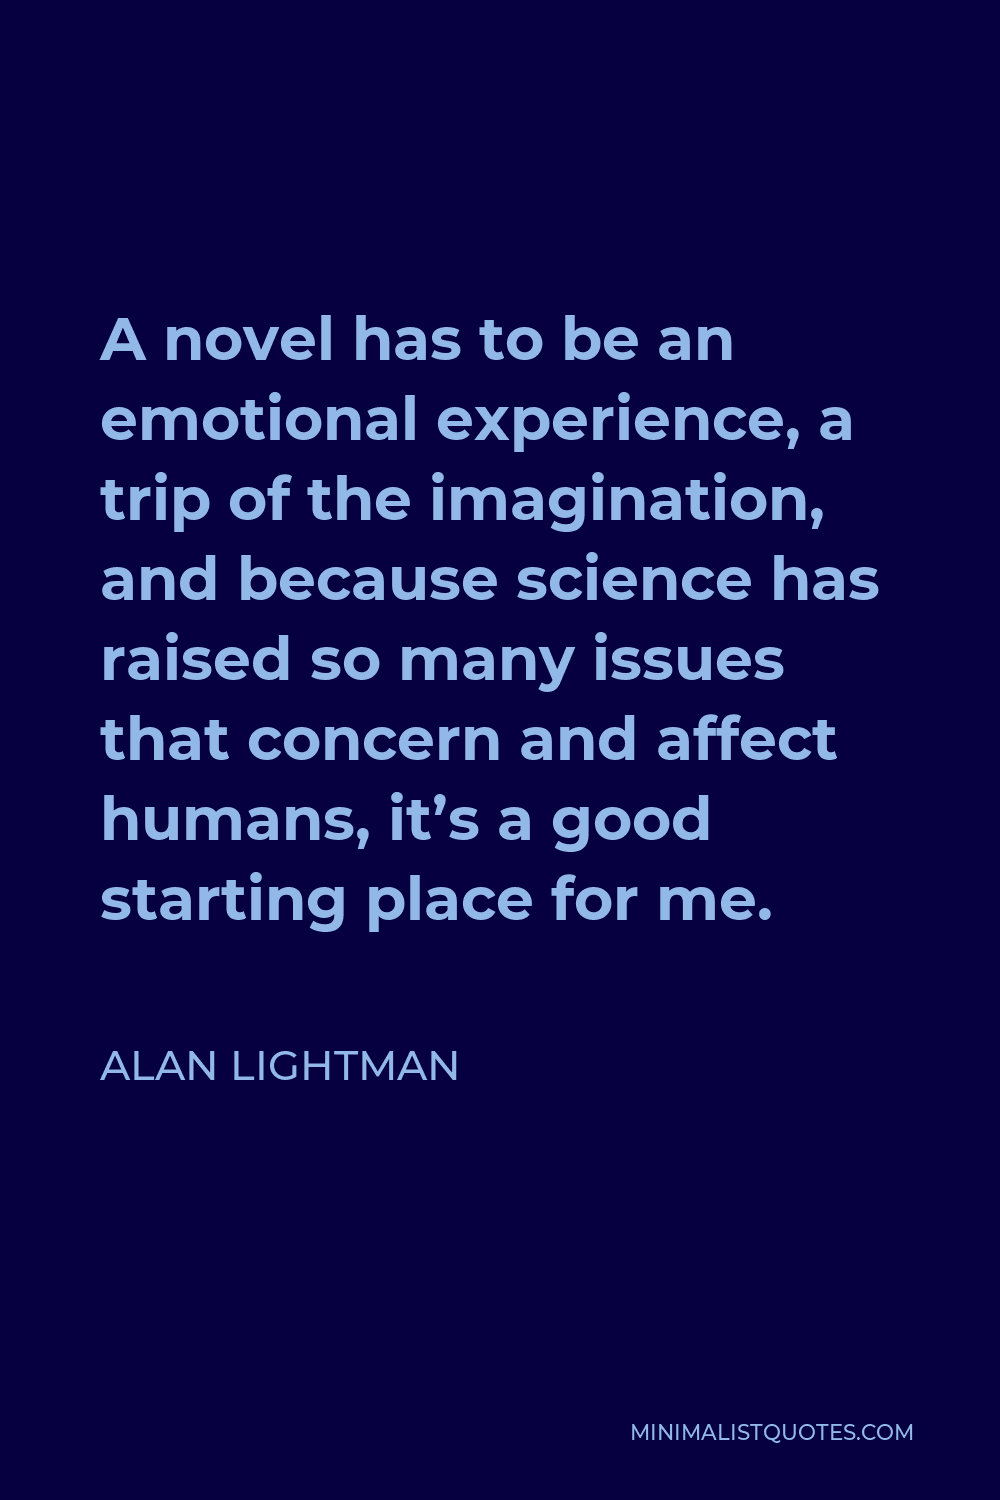 Alan Lightman Quote - A novel has to be an emotional experience, a trip of the imagination, and because science has raised so many issues that concern and affect humans, it’s a good starting place for me.